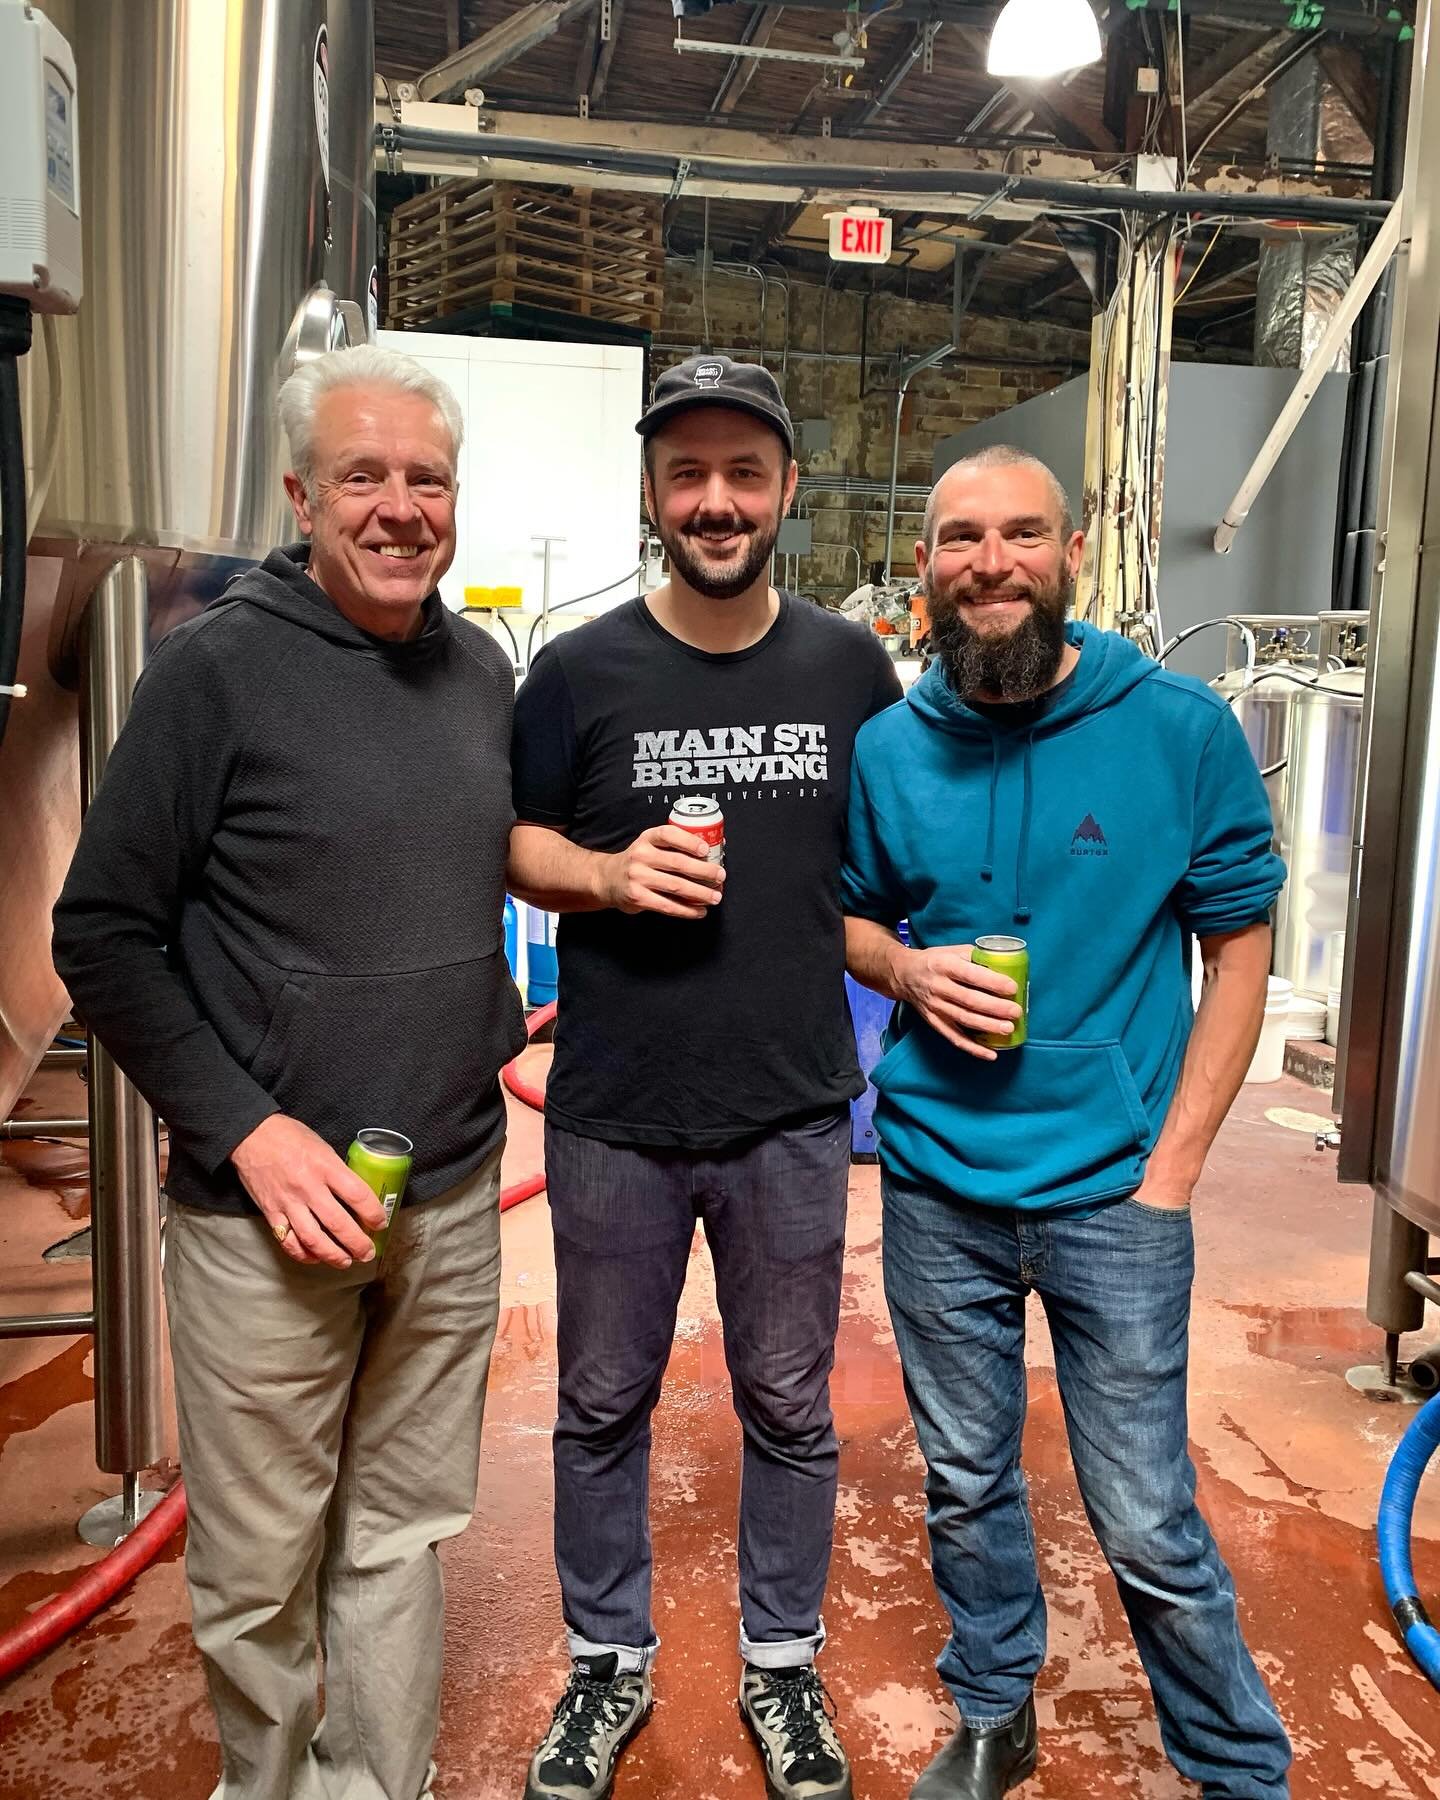 ASSEMBLE THE TROOP(ER)S

The boys were back in town today &mdash; that&rsquo;s a few of of our former back of house fellas Bill Riley, Big Joe Ross and Alex Beilby-Tipping, from left to right &mdash; to help us brew up a new spin on our Kingpin Hazy 